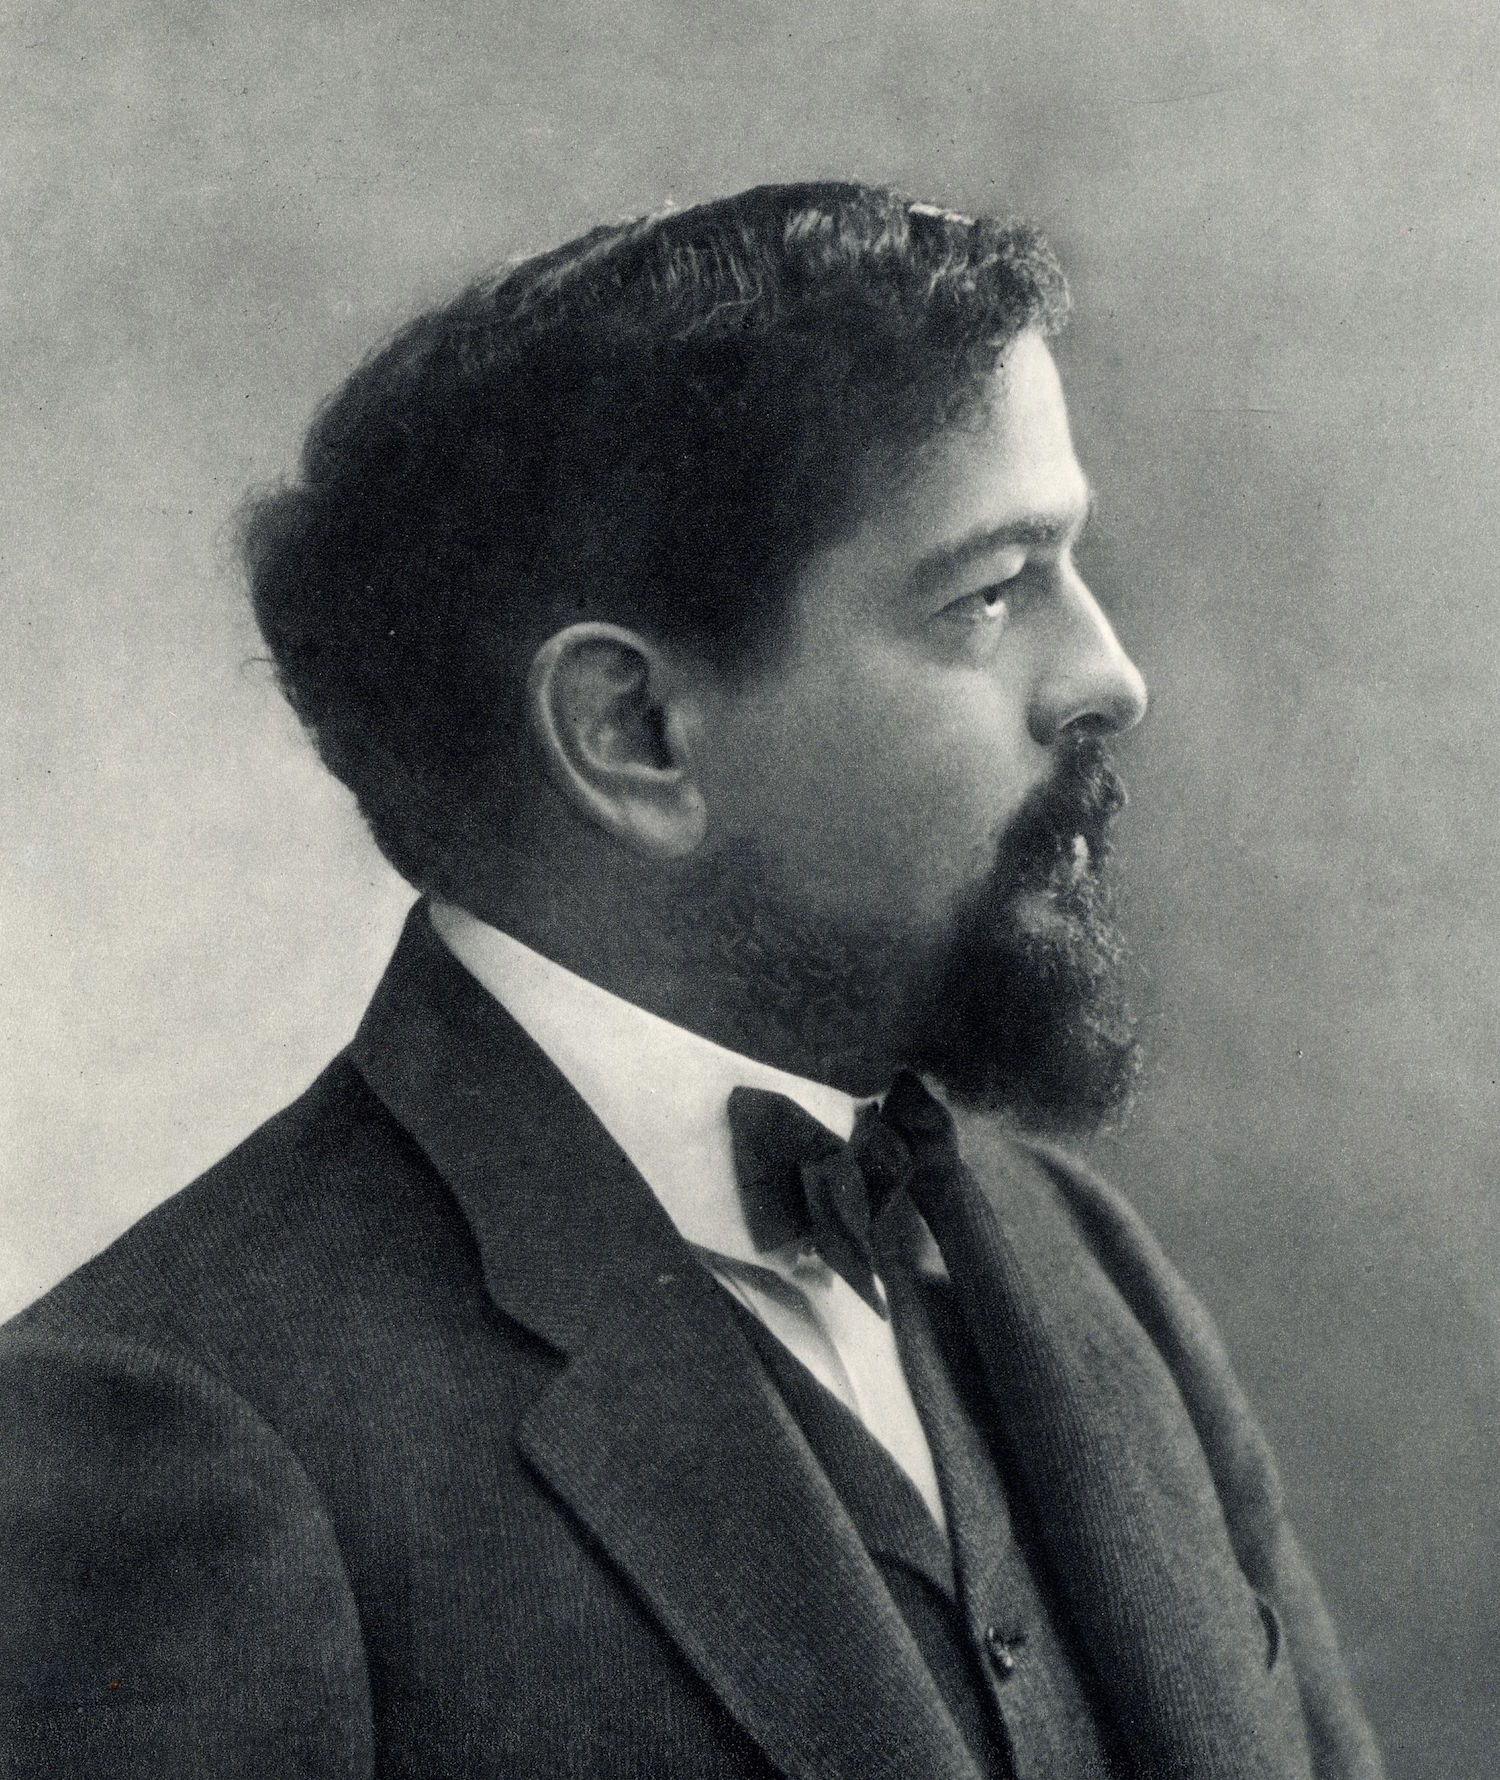 (Achille) Claude Debussy (1862-1919) French composer. From a photograph by Nadar, pseudonym of Gaspard-Felix Tournachon (1820-1910).